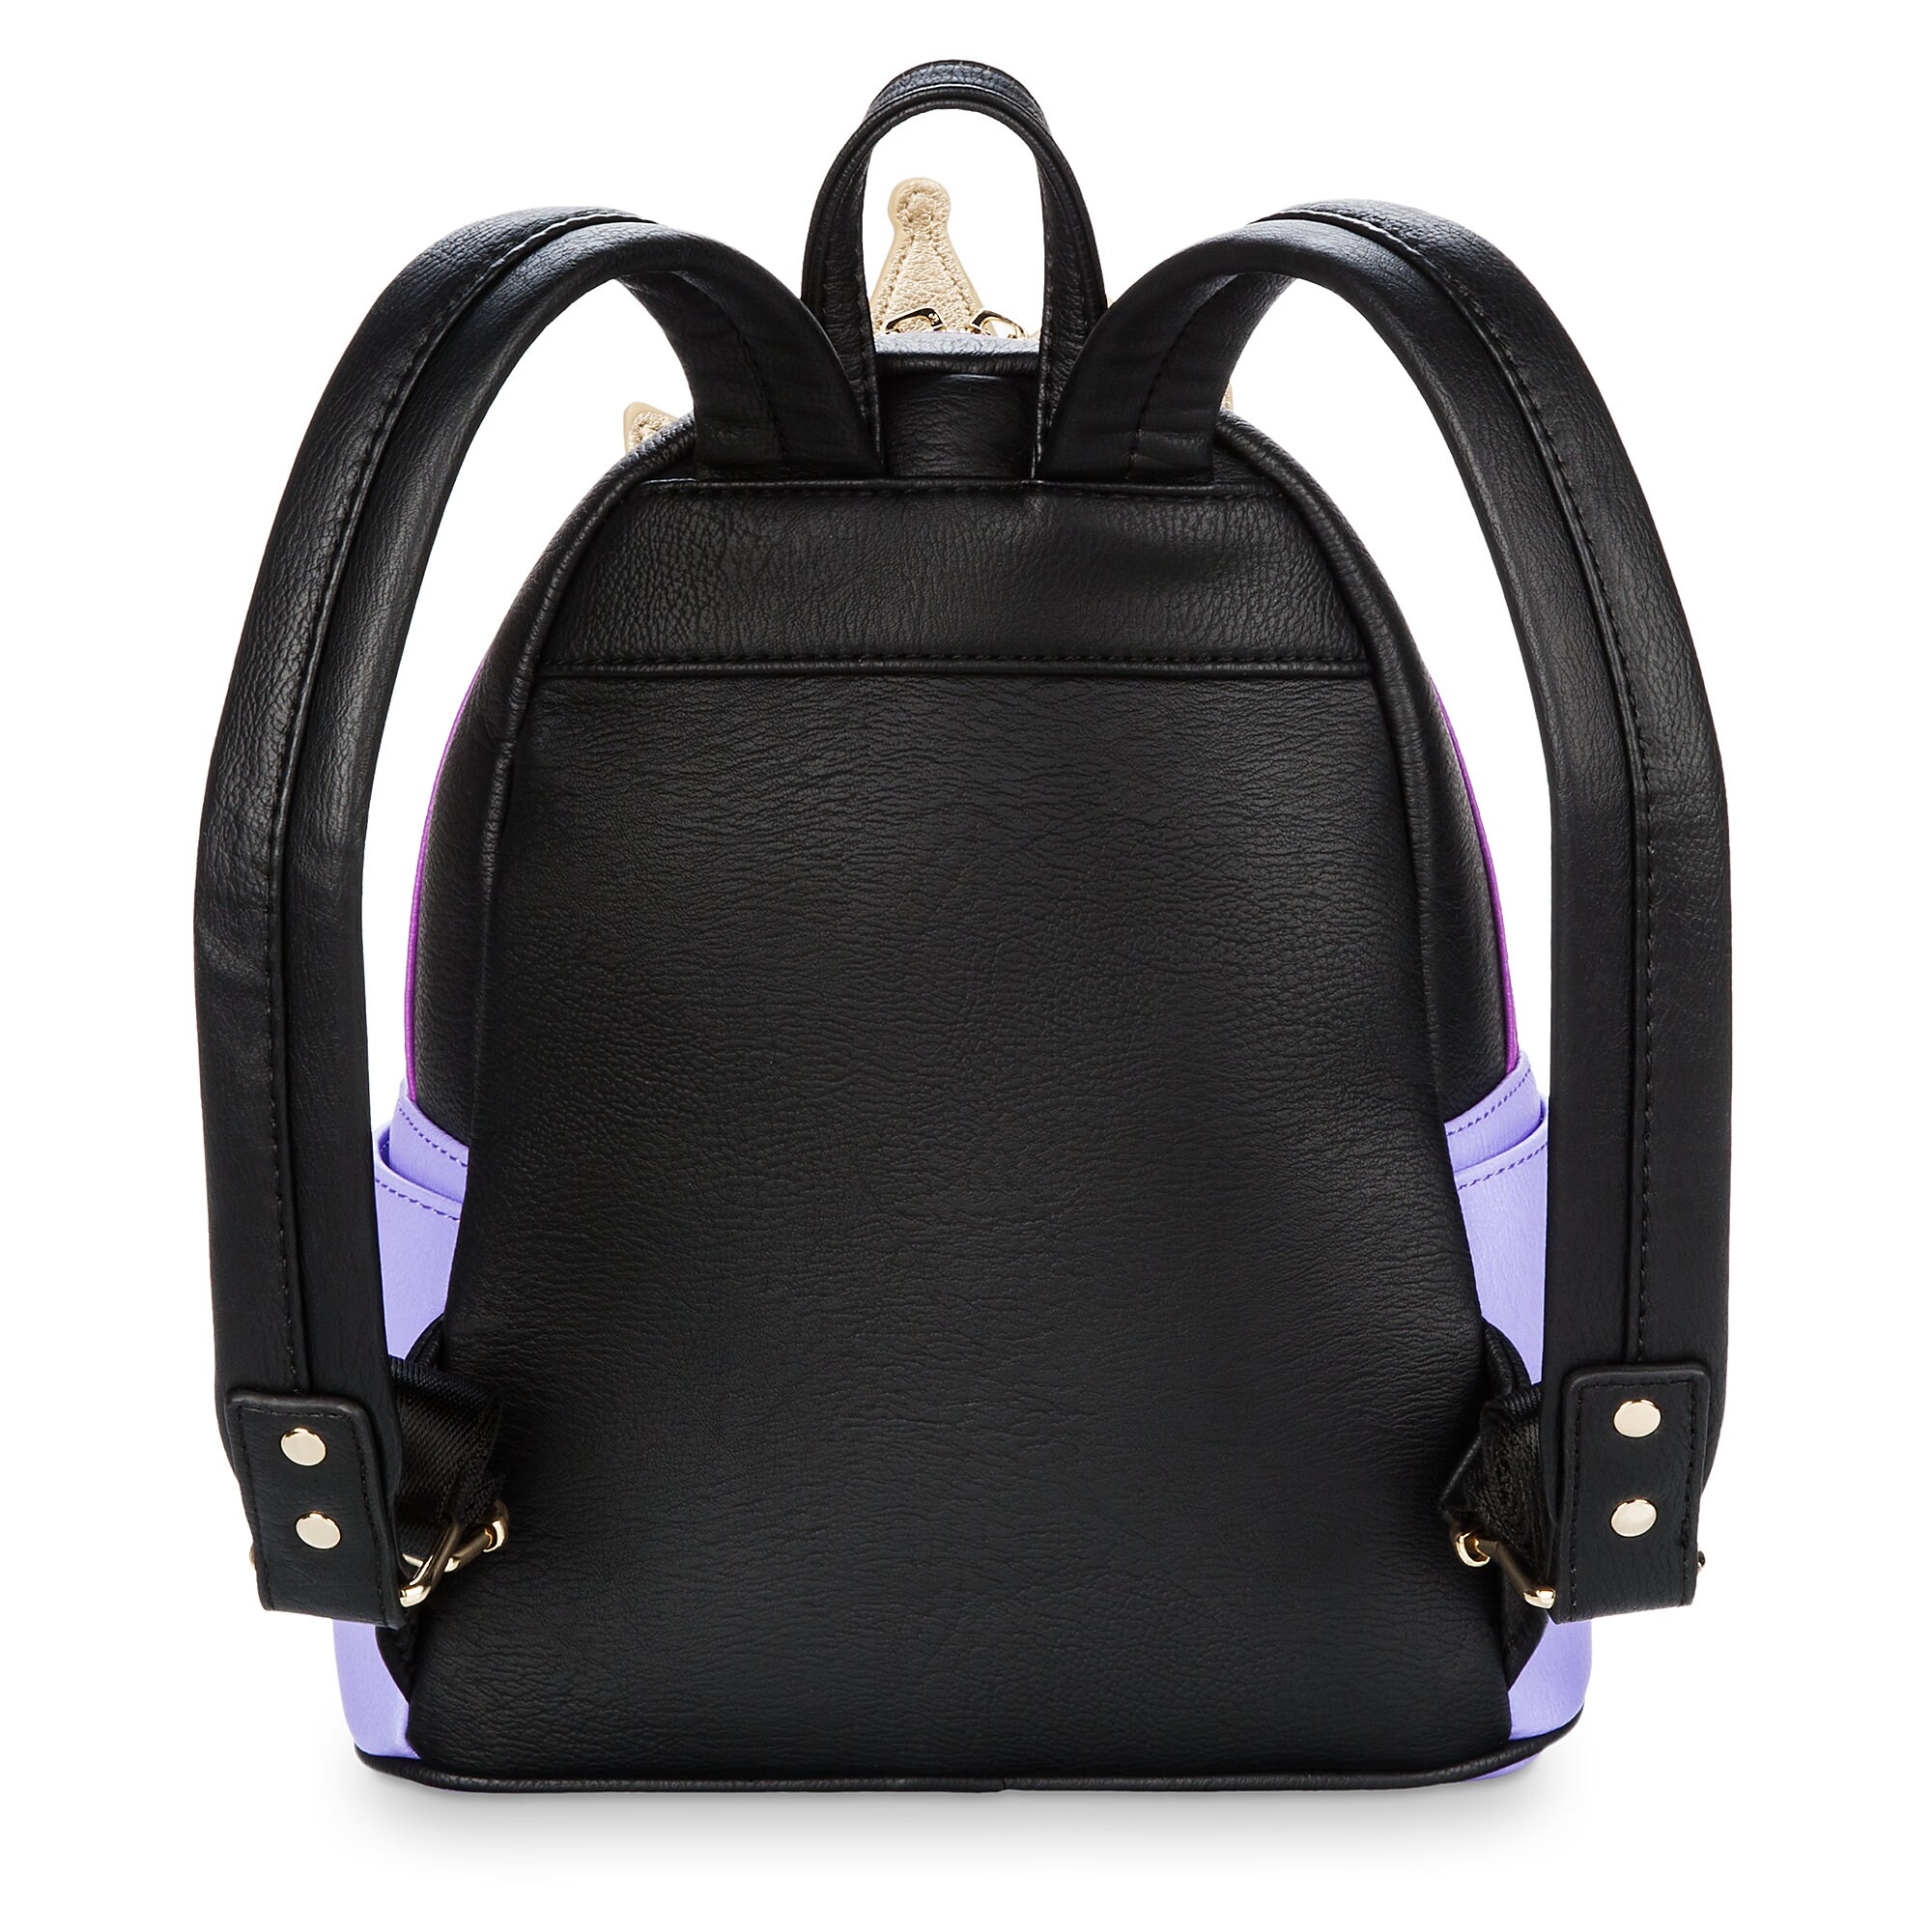 Evil Queen Mini Backpack by Loungefly